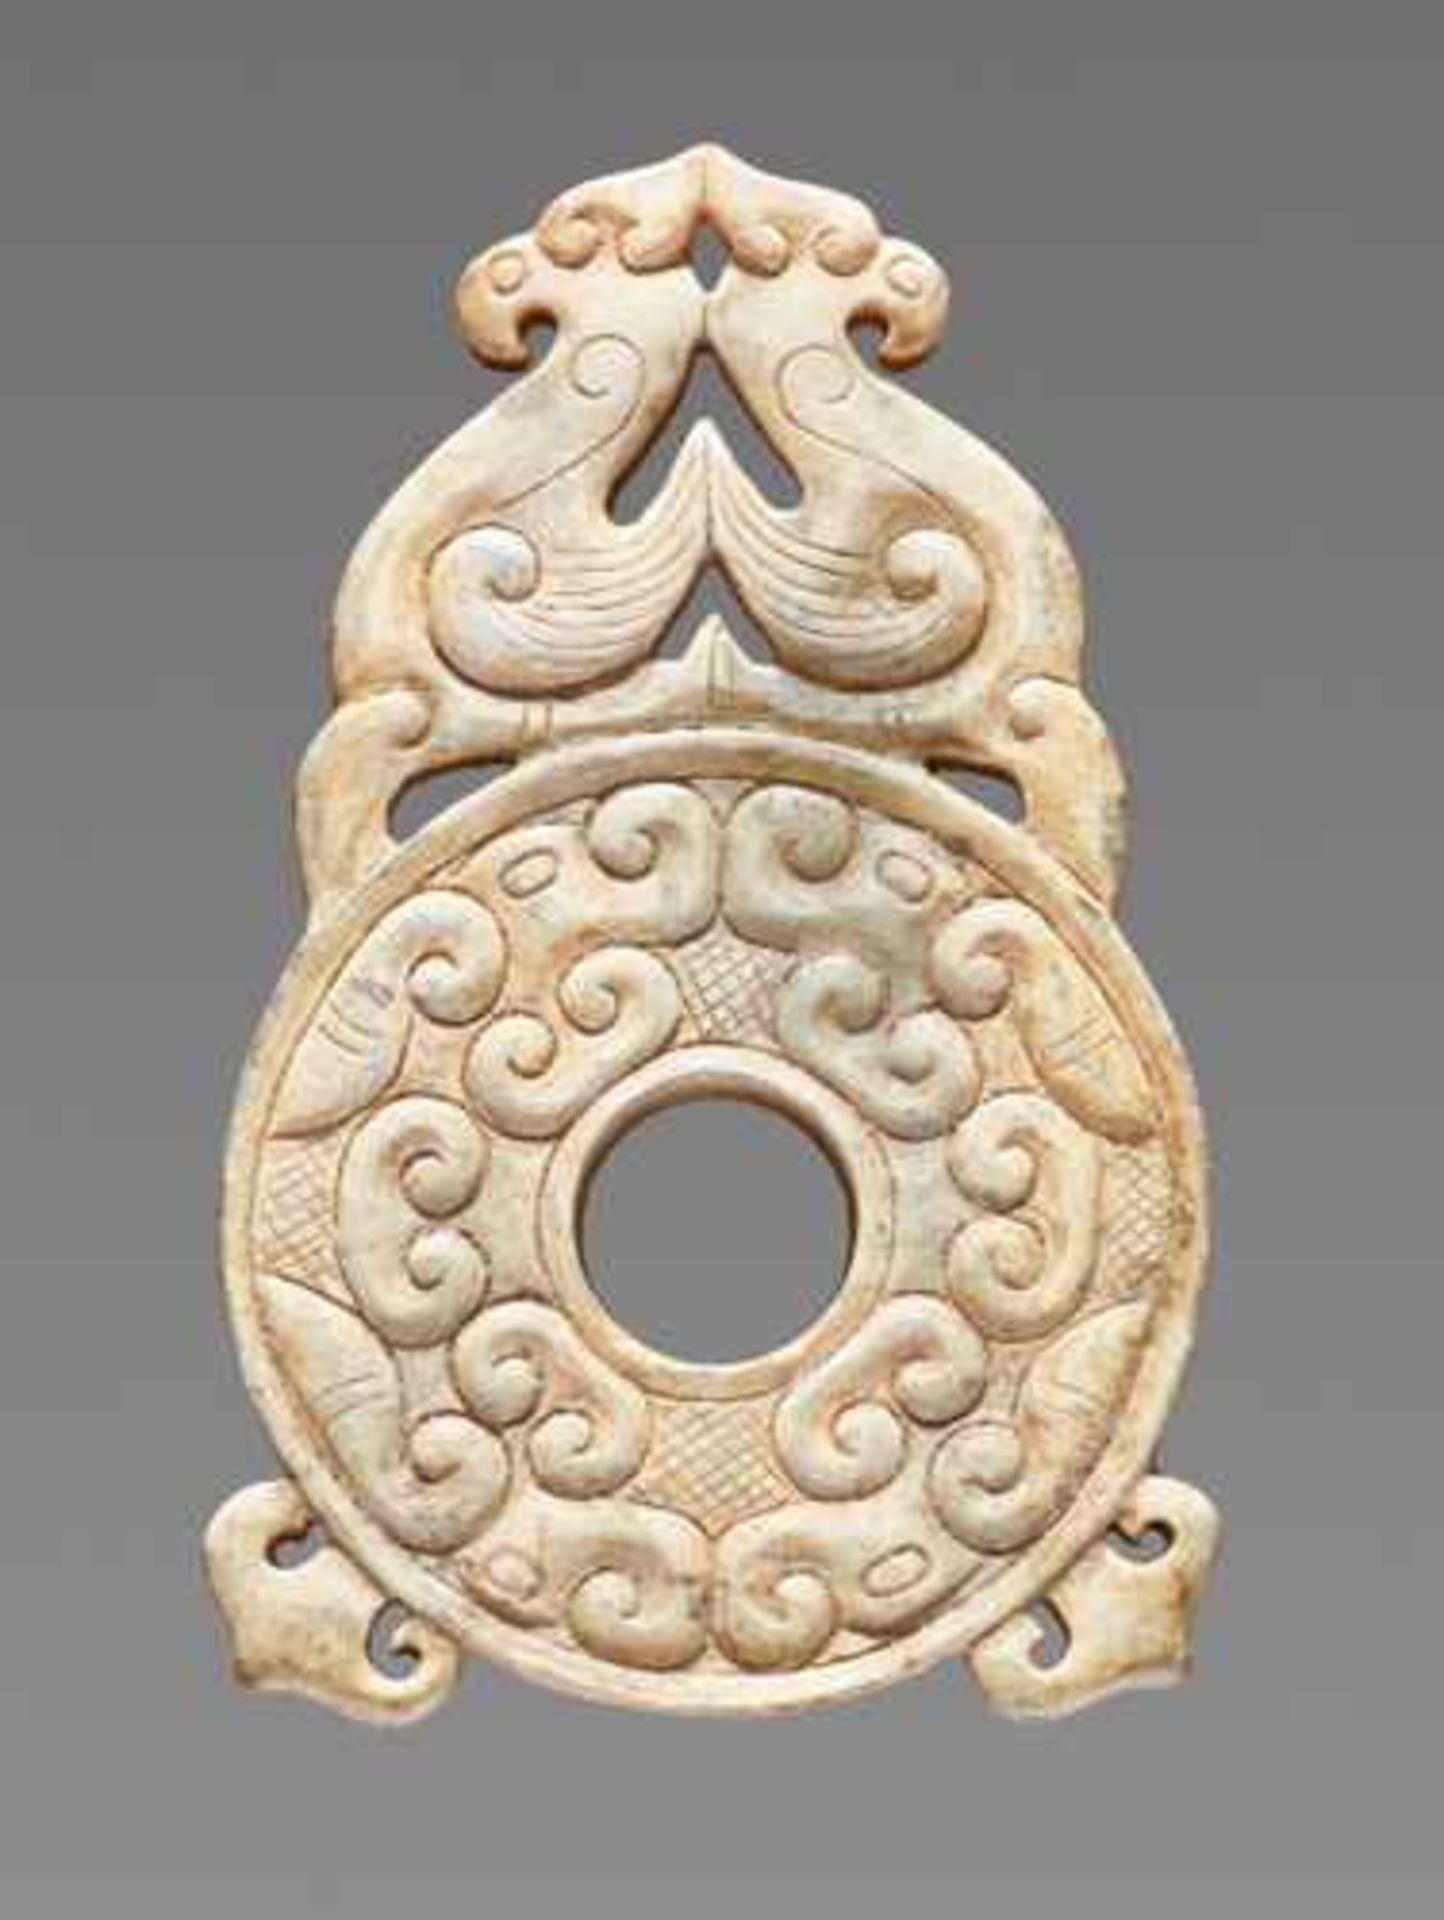 AN ATTRACTIVE SMALL DISC ORNAMENT EMBELLISHED WITH OPENWORK PHOENIXES ON TOP Jade, China. Eastern - Image 2 of 6